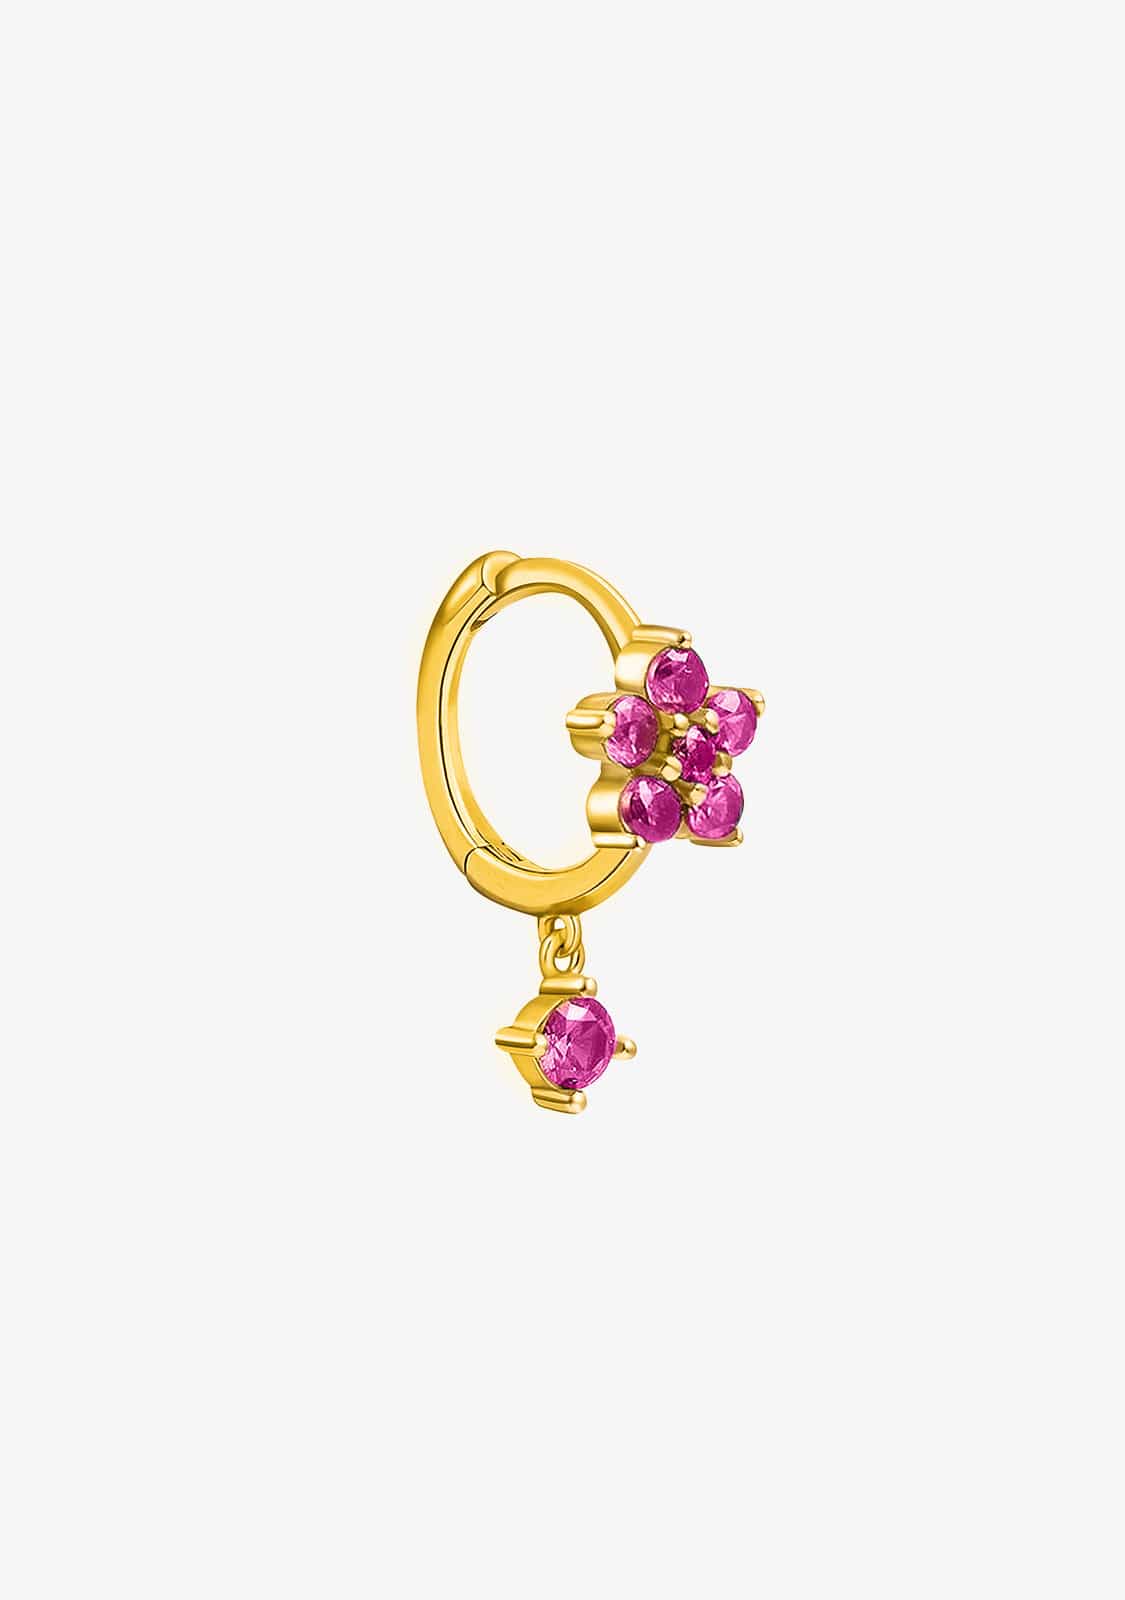 Fiore Ruby Piercing Gold